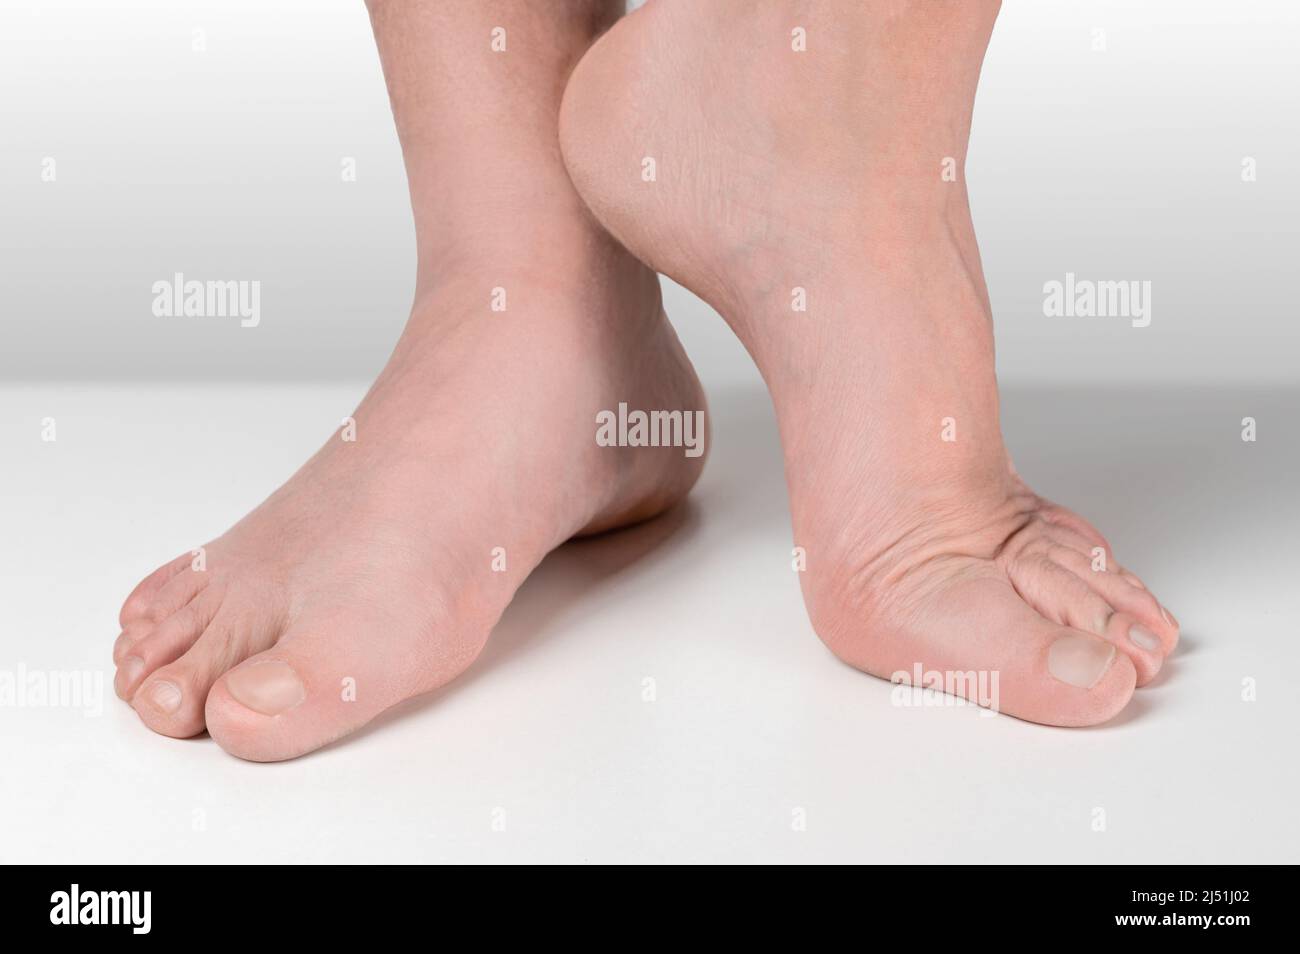 men feet after pedicure on white background. Close up well-groomed feet of an adult man. pedicure and foot care cosmetics Stock Photo